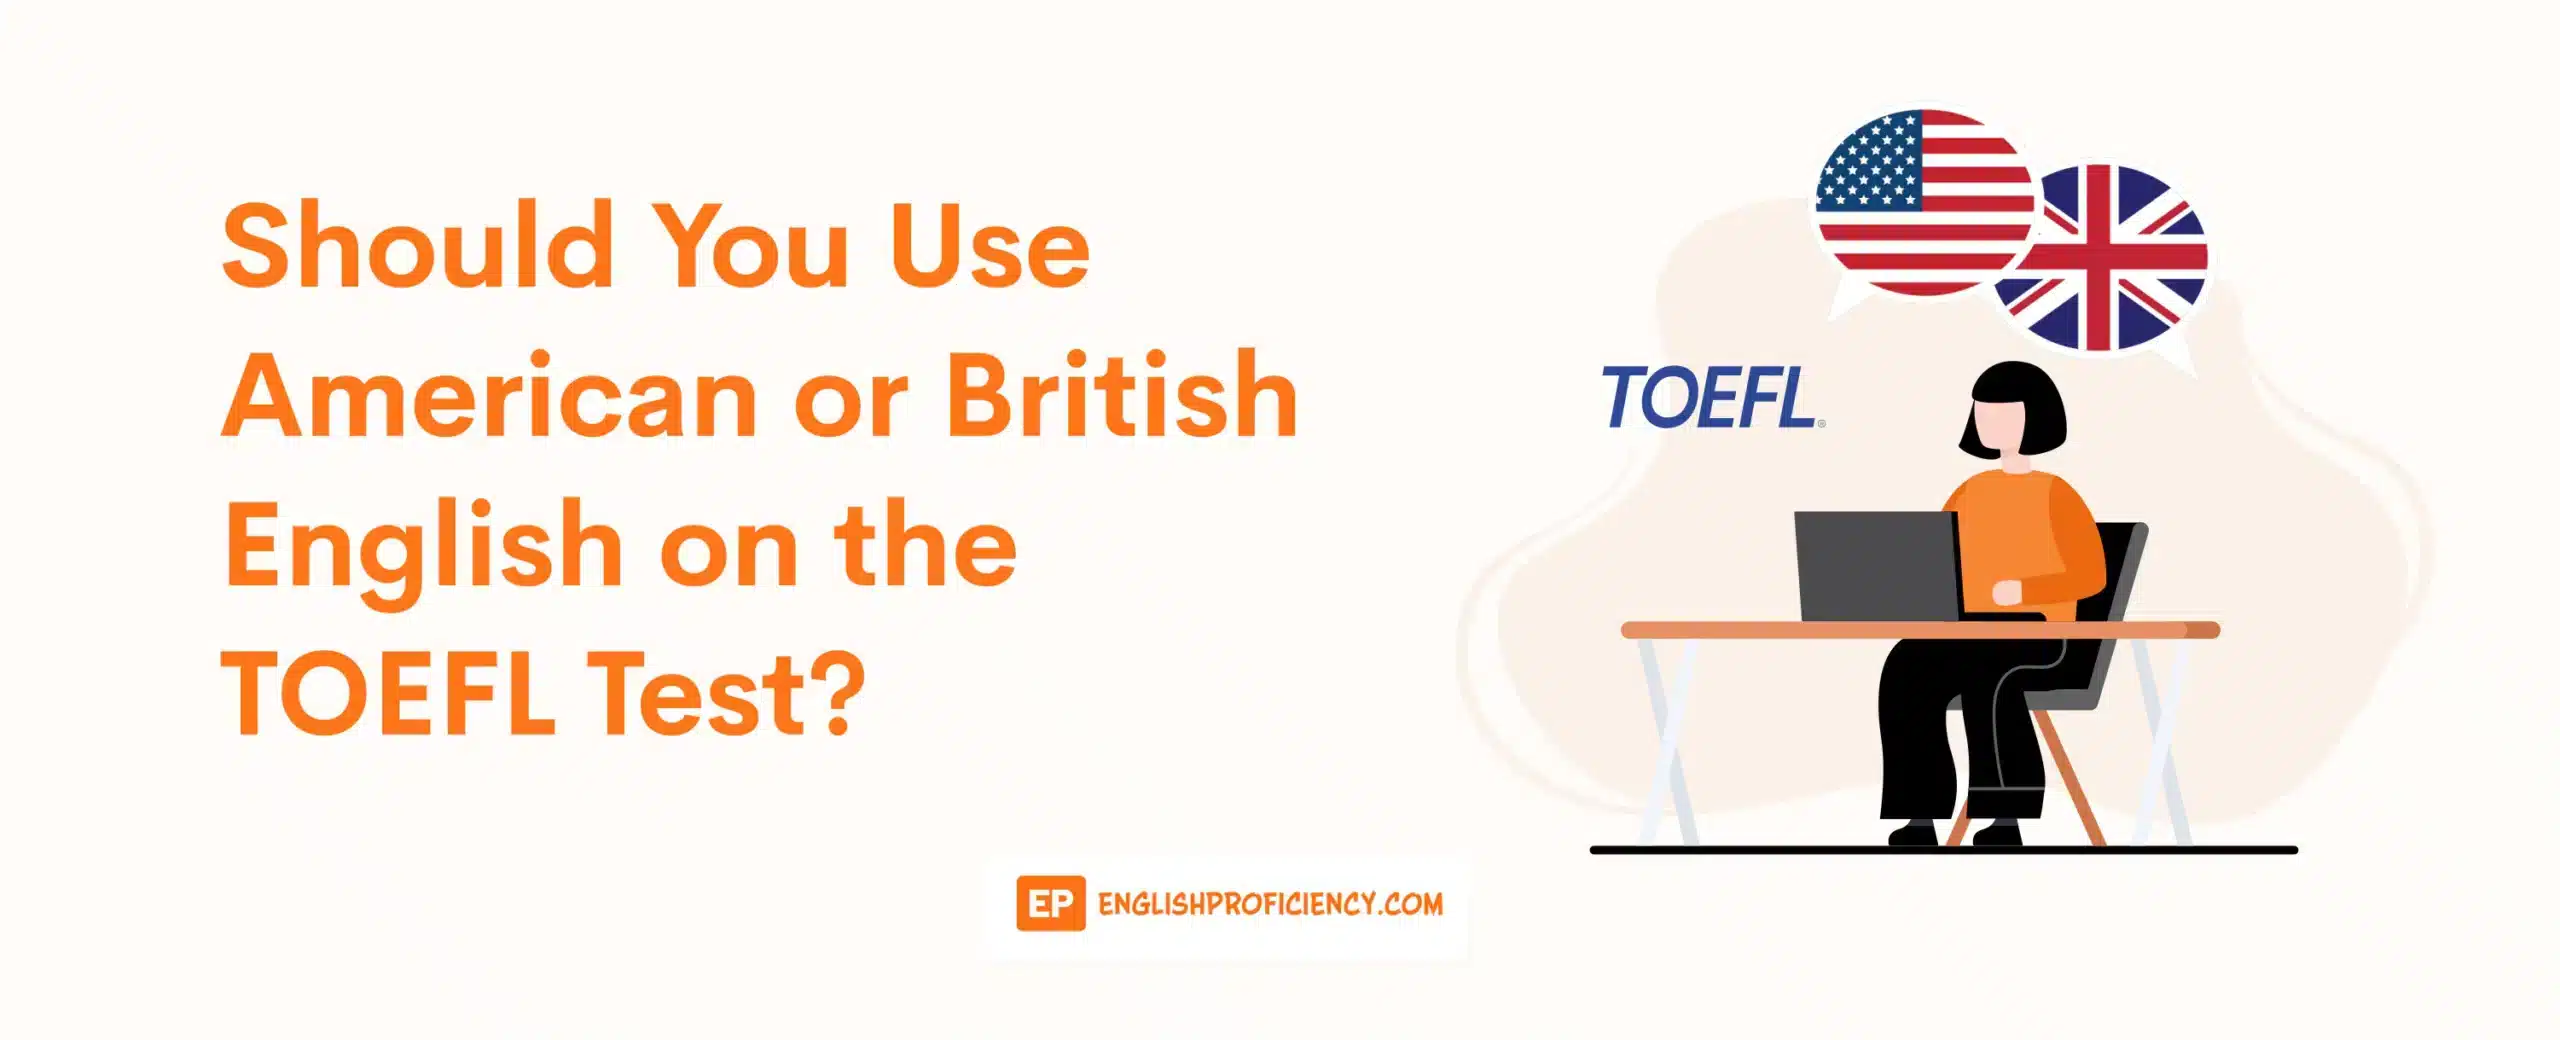 Should You Use American or British English on the TOEFL Test